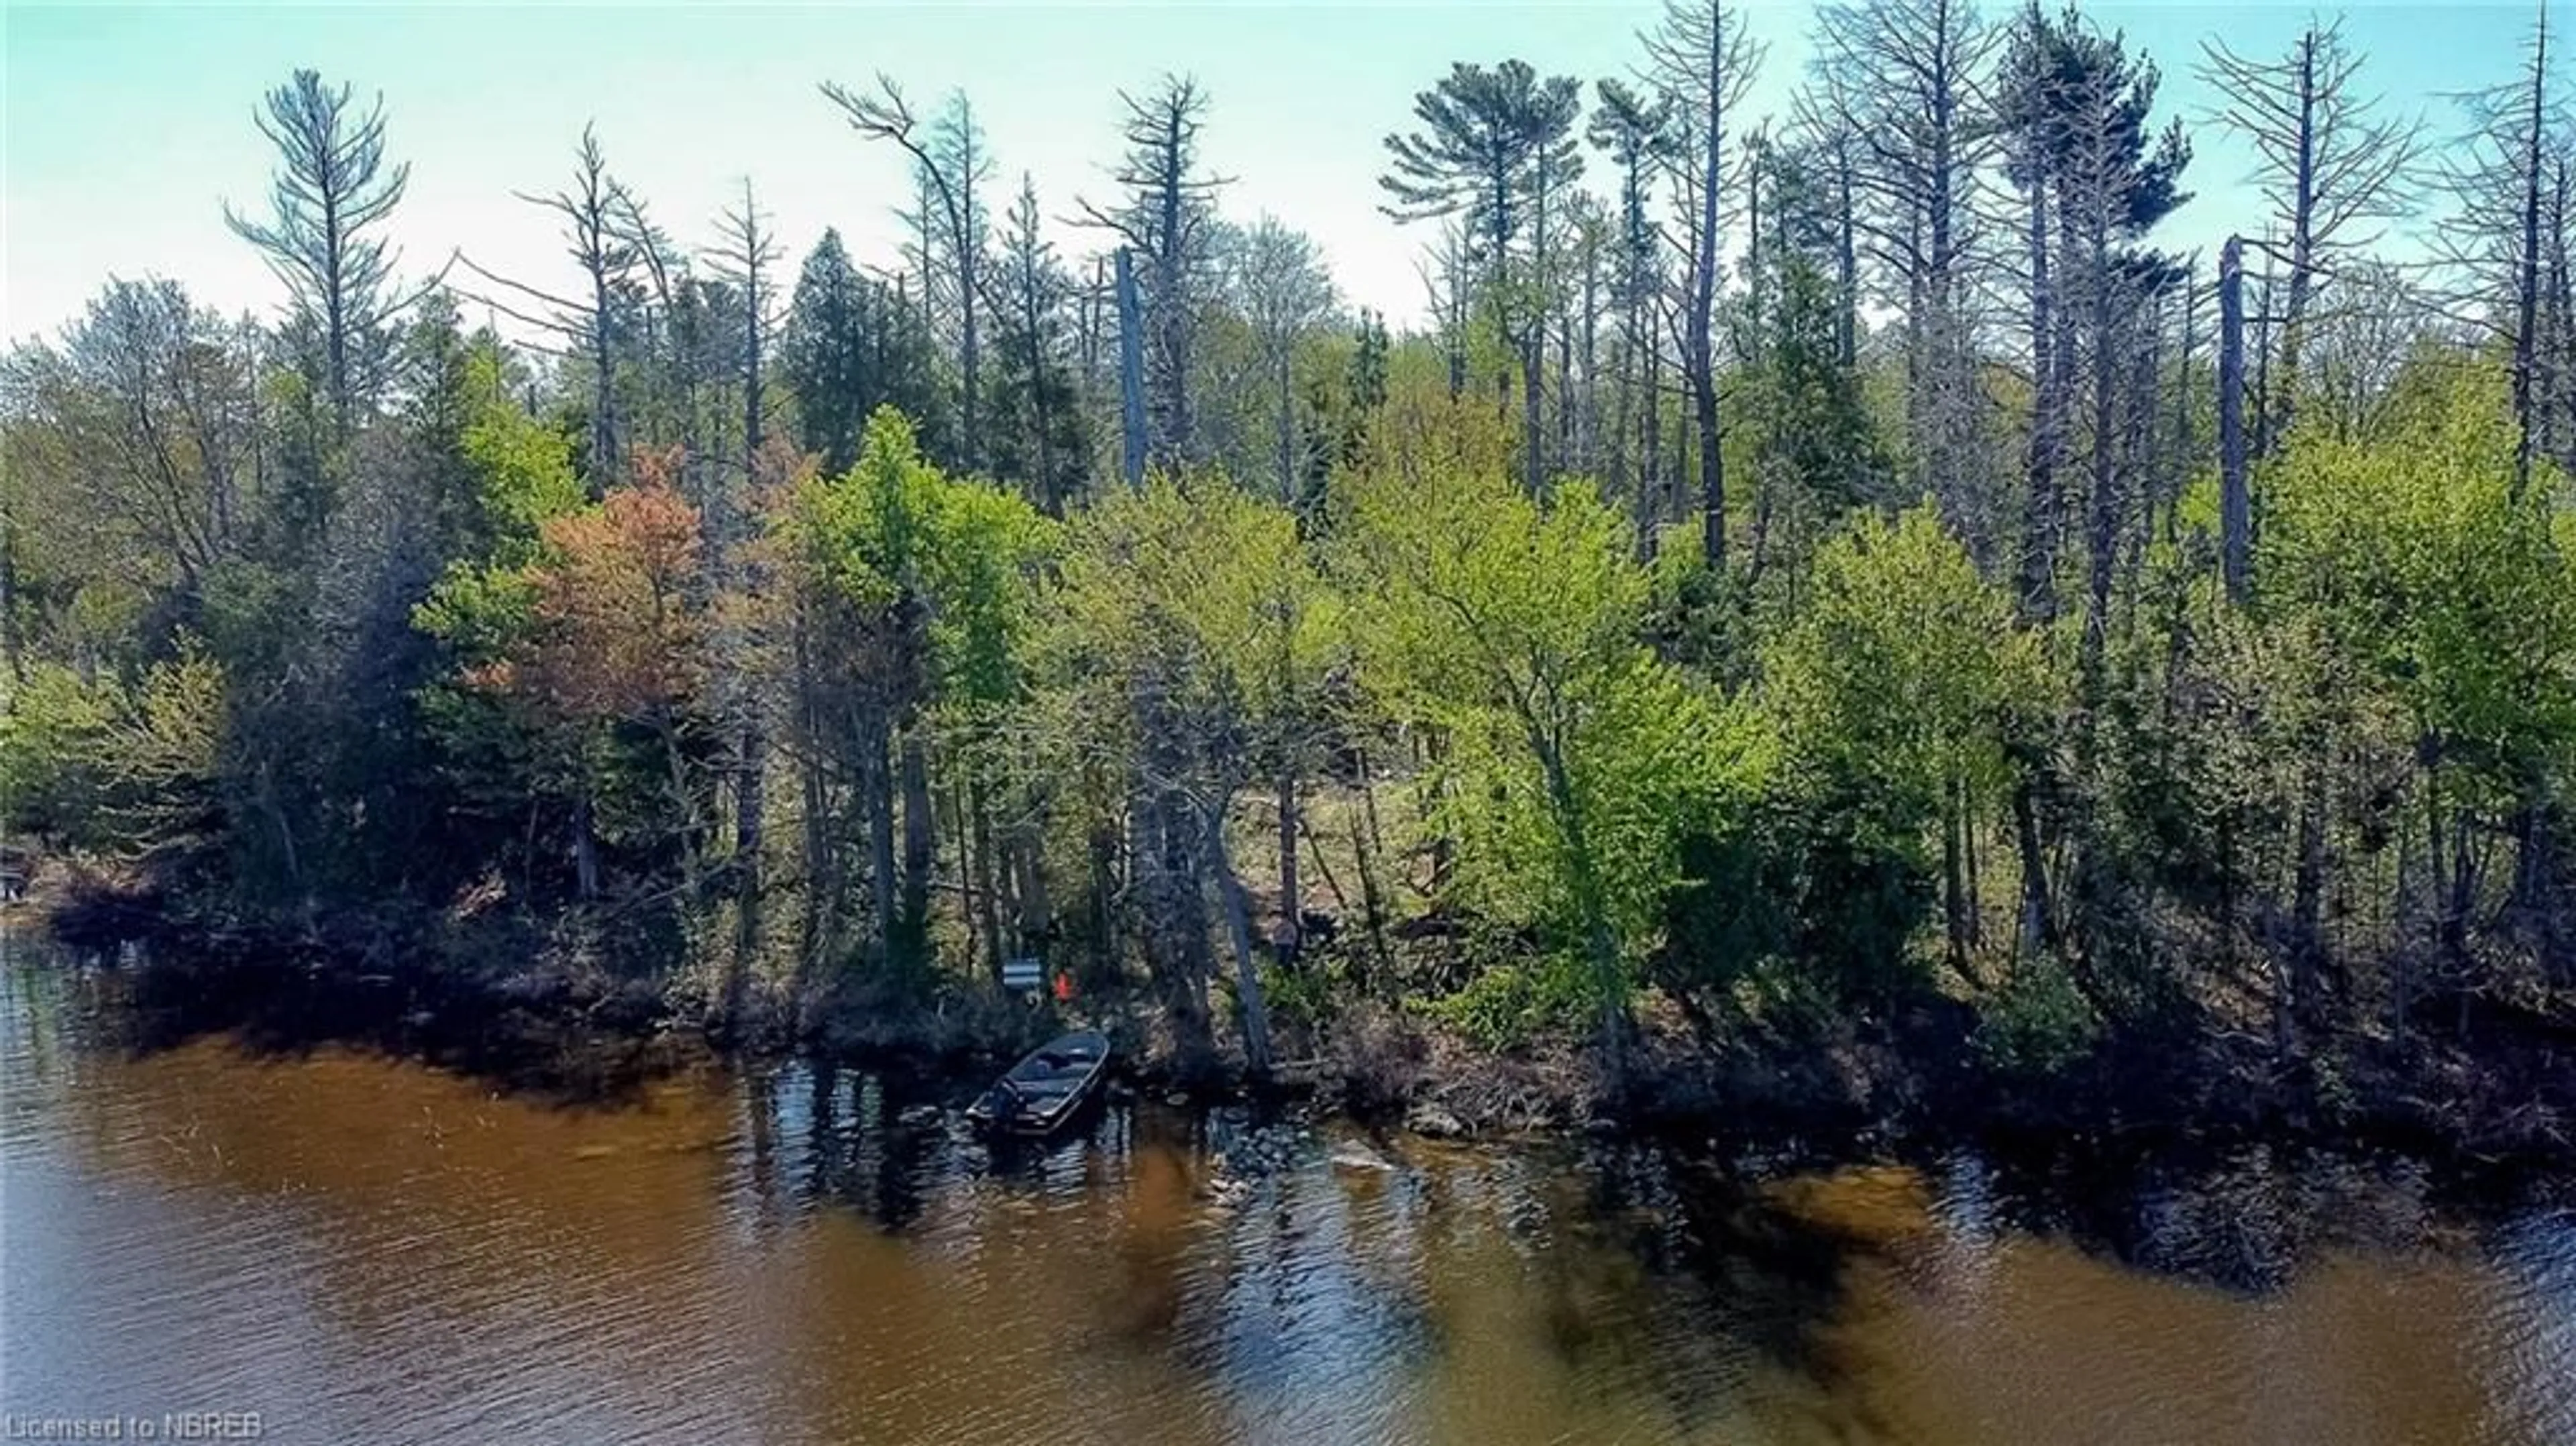 Forest view for LOT 3 Grand Trunk Island, Callander Ontario P0H 1H0